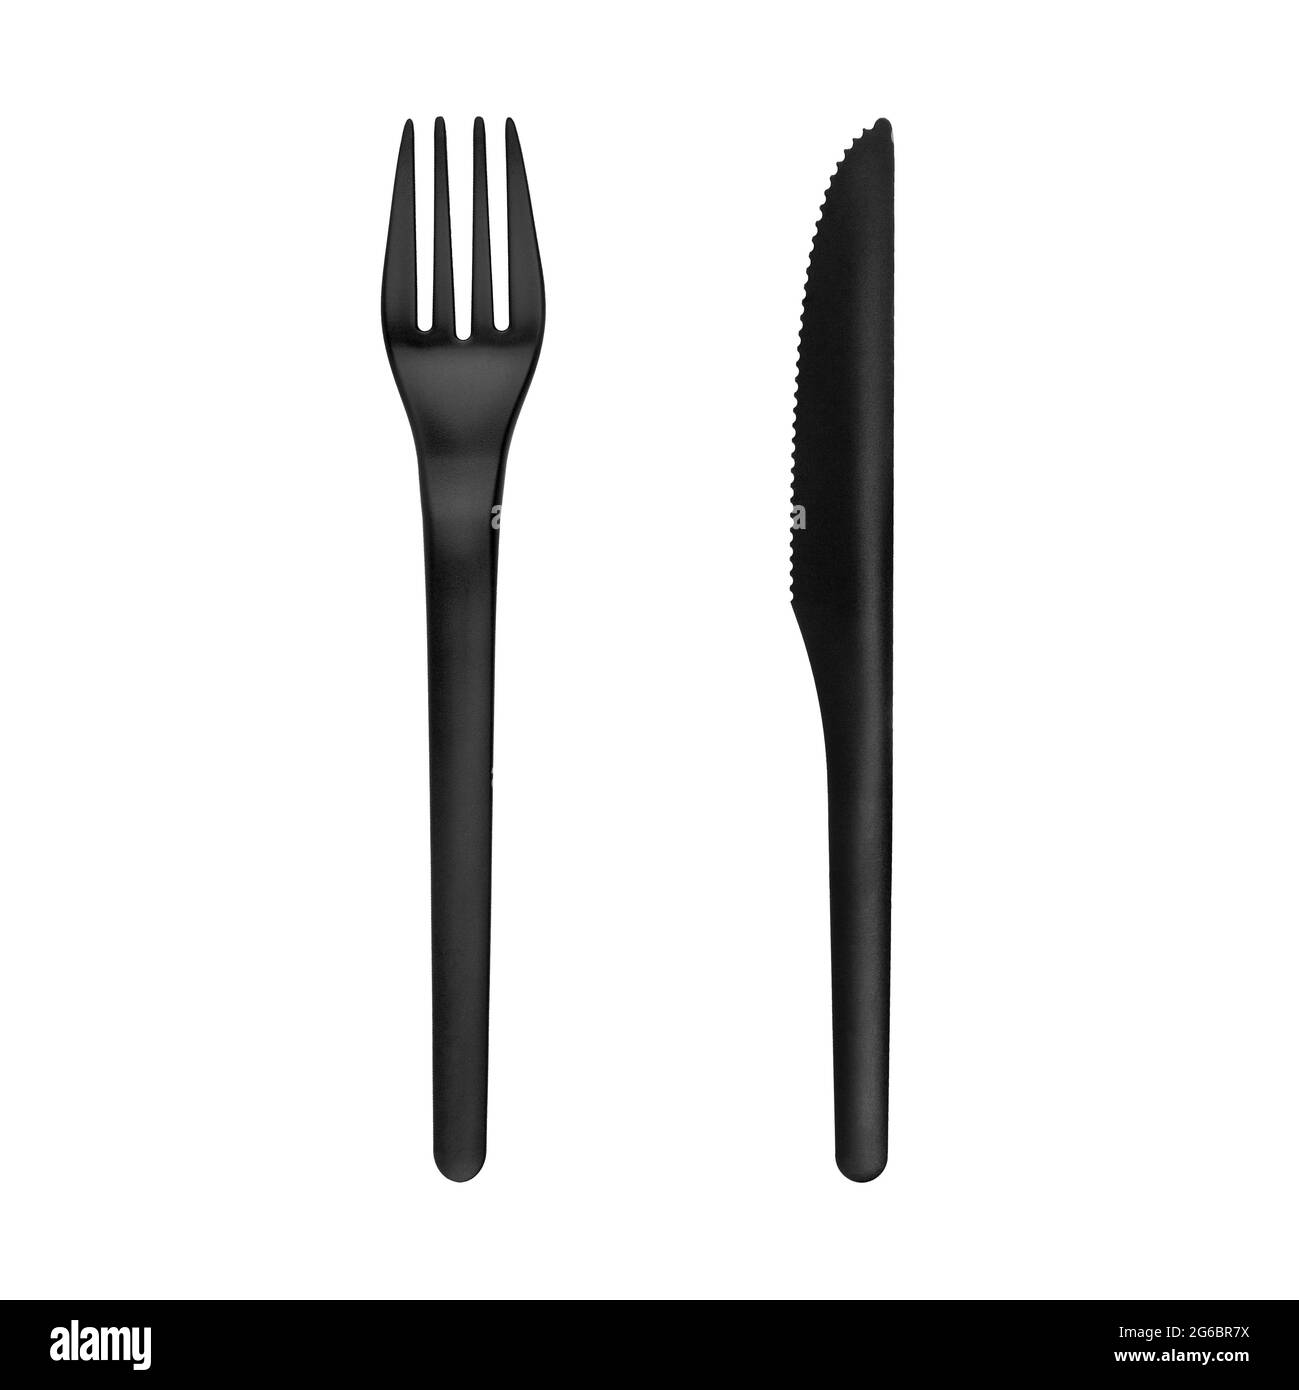 Plastic knife and fork set white background isolated closeup, disposable plastic tableware, one-off black plastic fork and knife, kitchen utensil Stock Photo